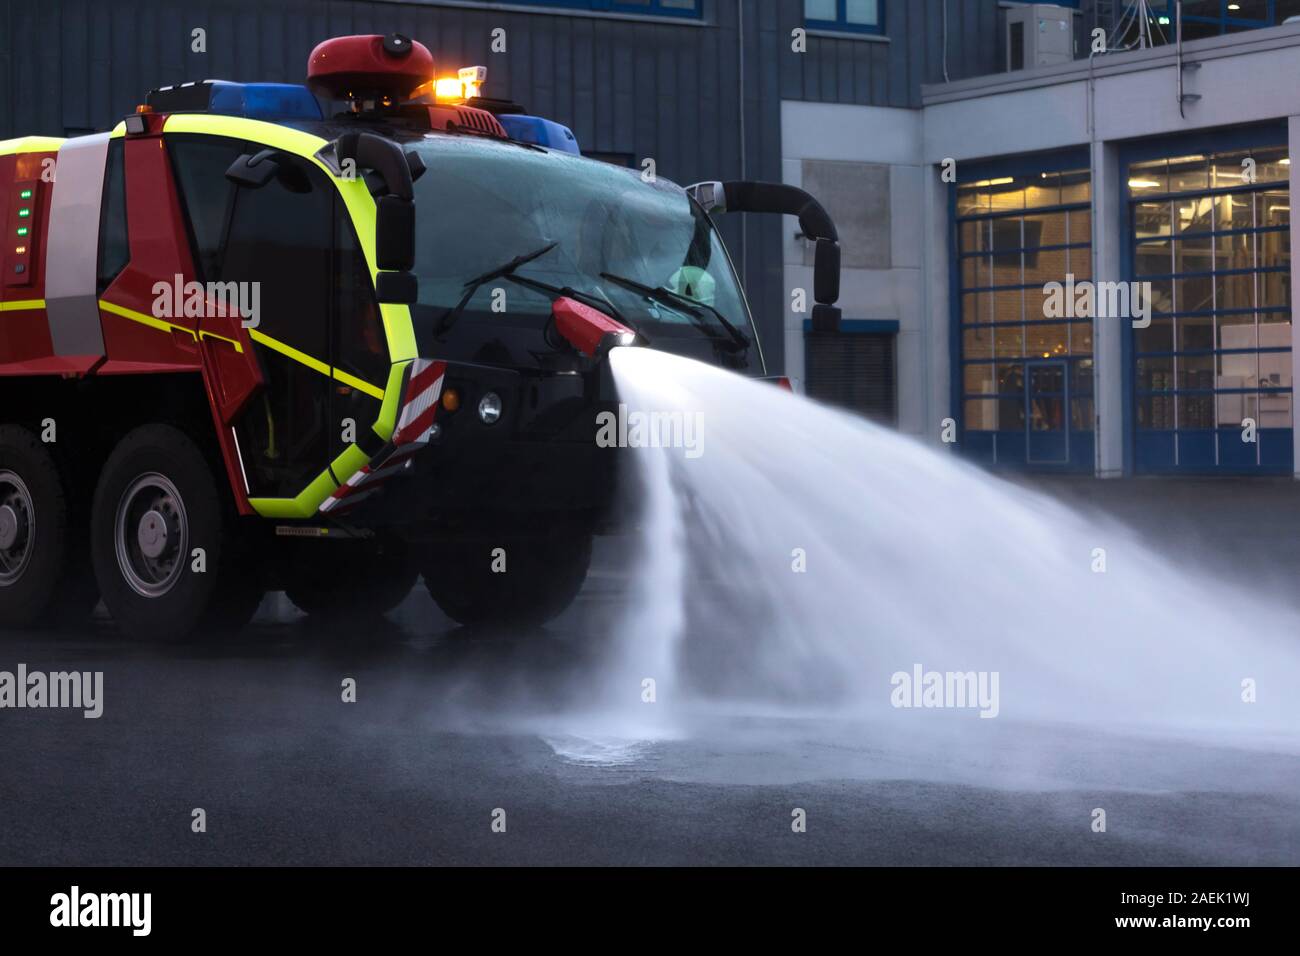 modern airport fire department fire engine clears with water Stock Photo